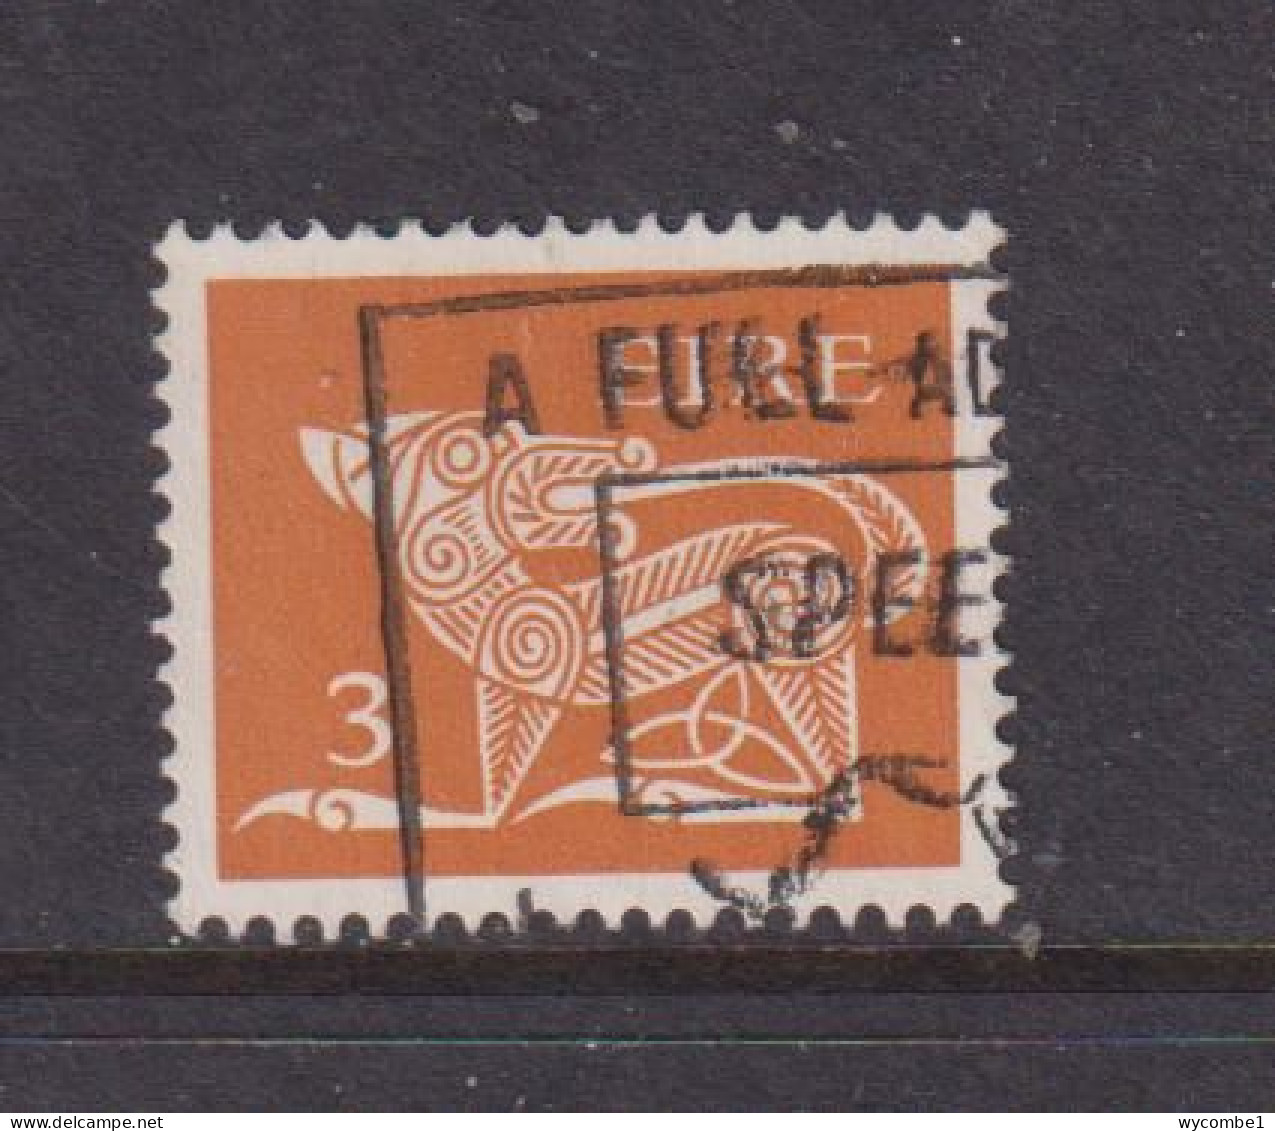 IRELAND - 1971  Decimal Currency Definitives  3p  Used As Scan - Gebraucht